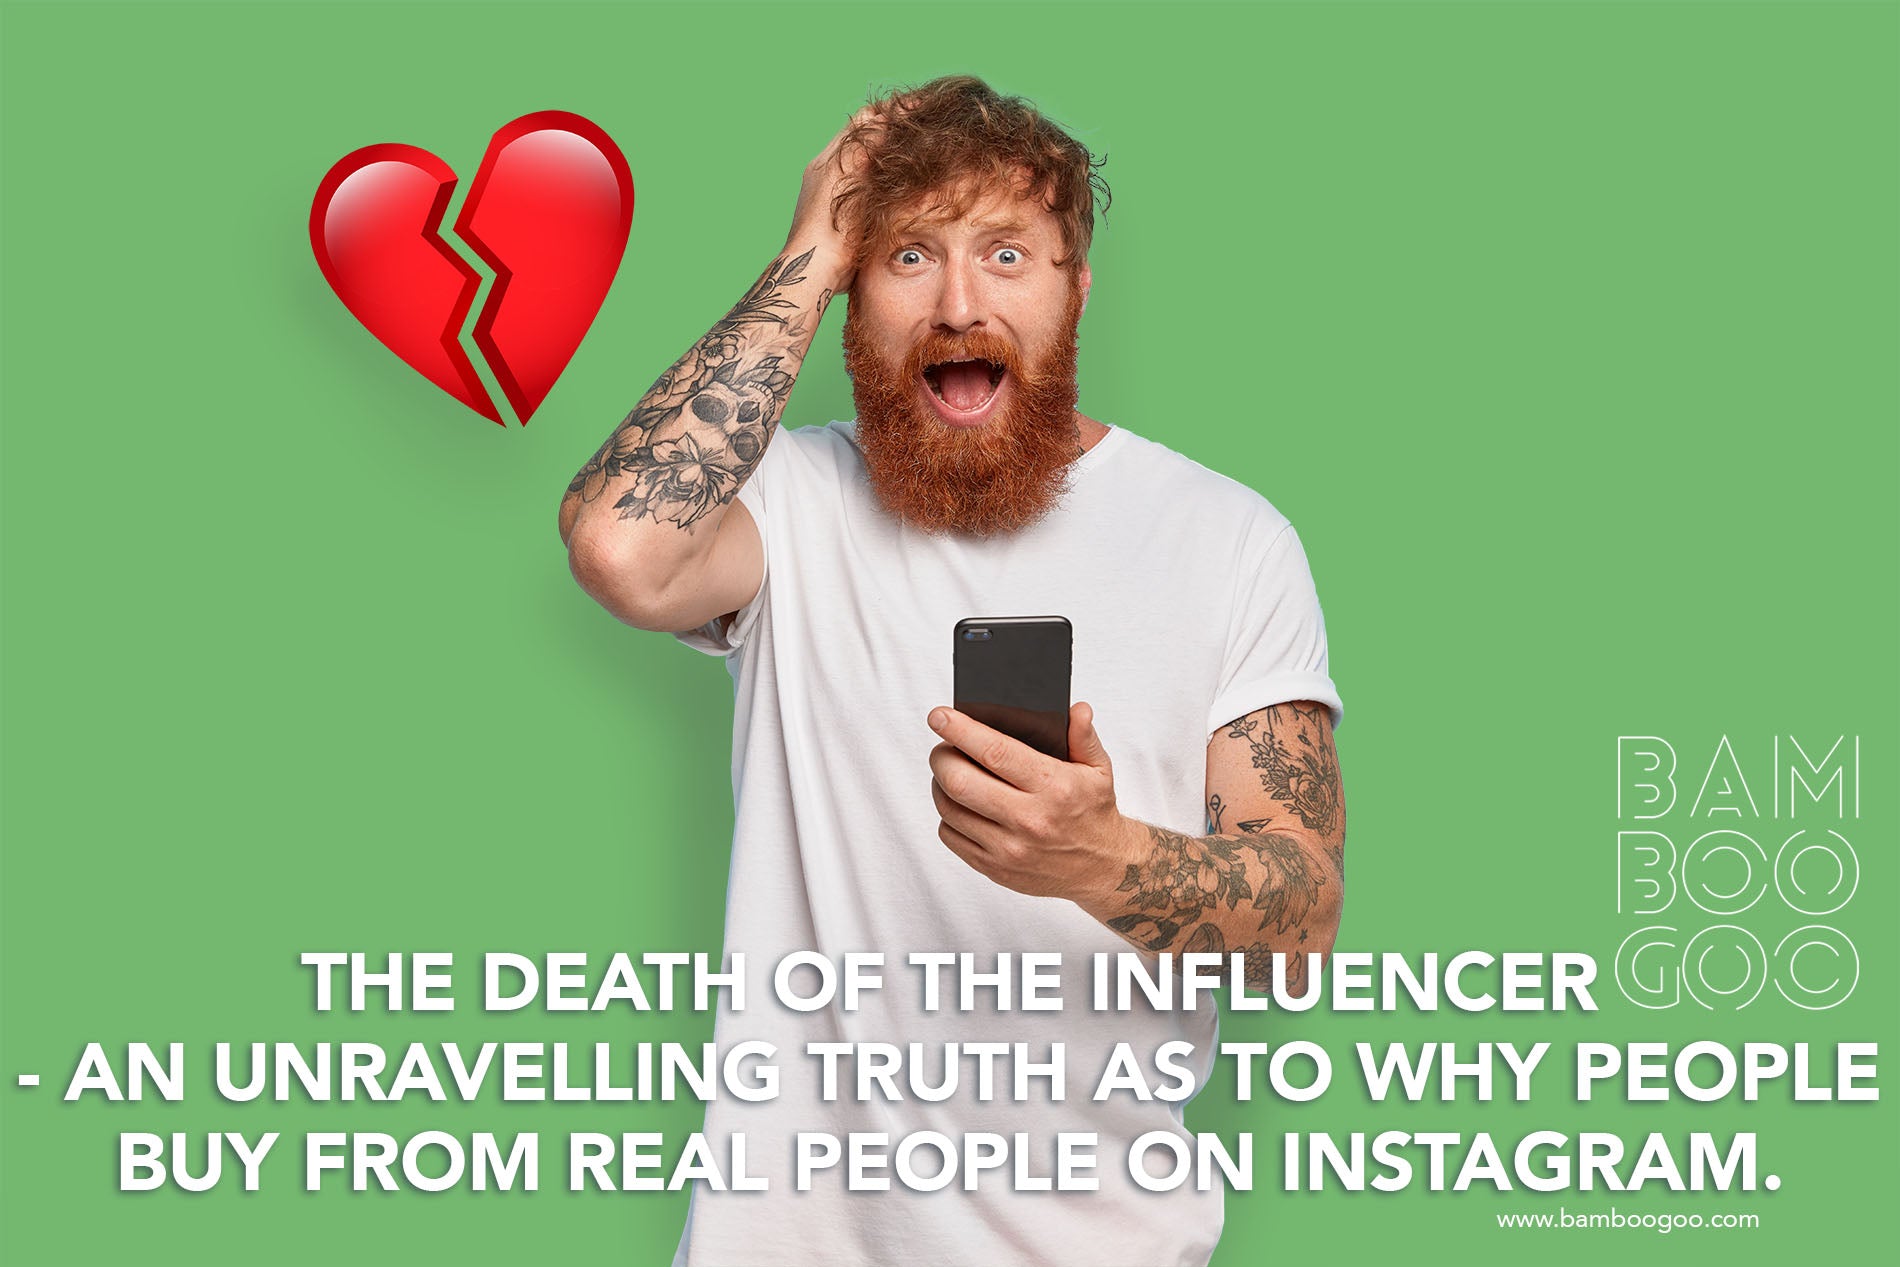 The Death of the Influencer